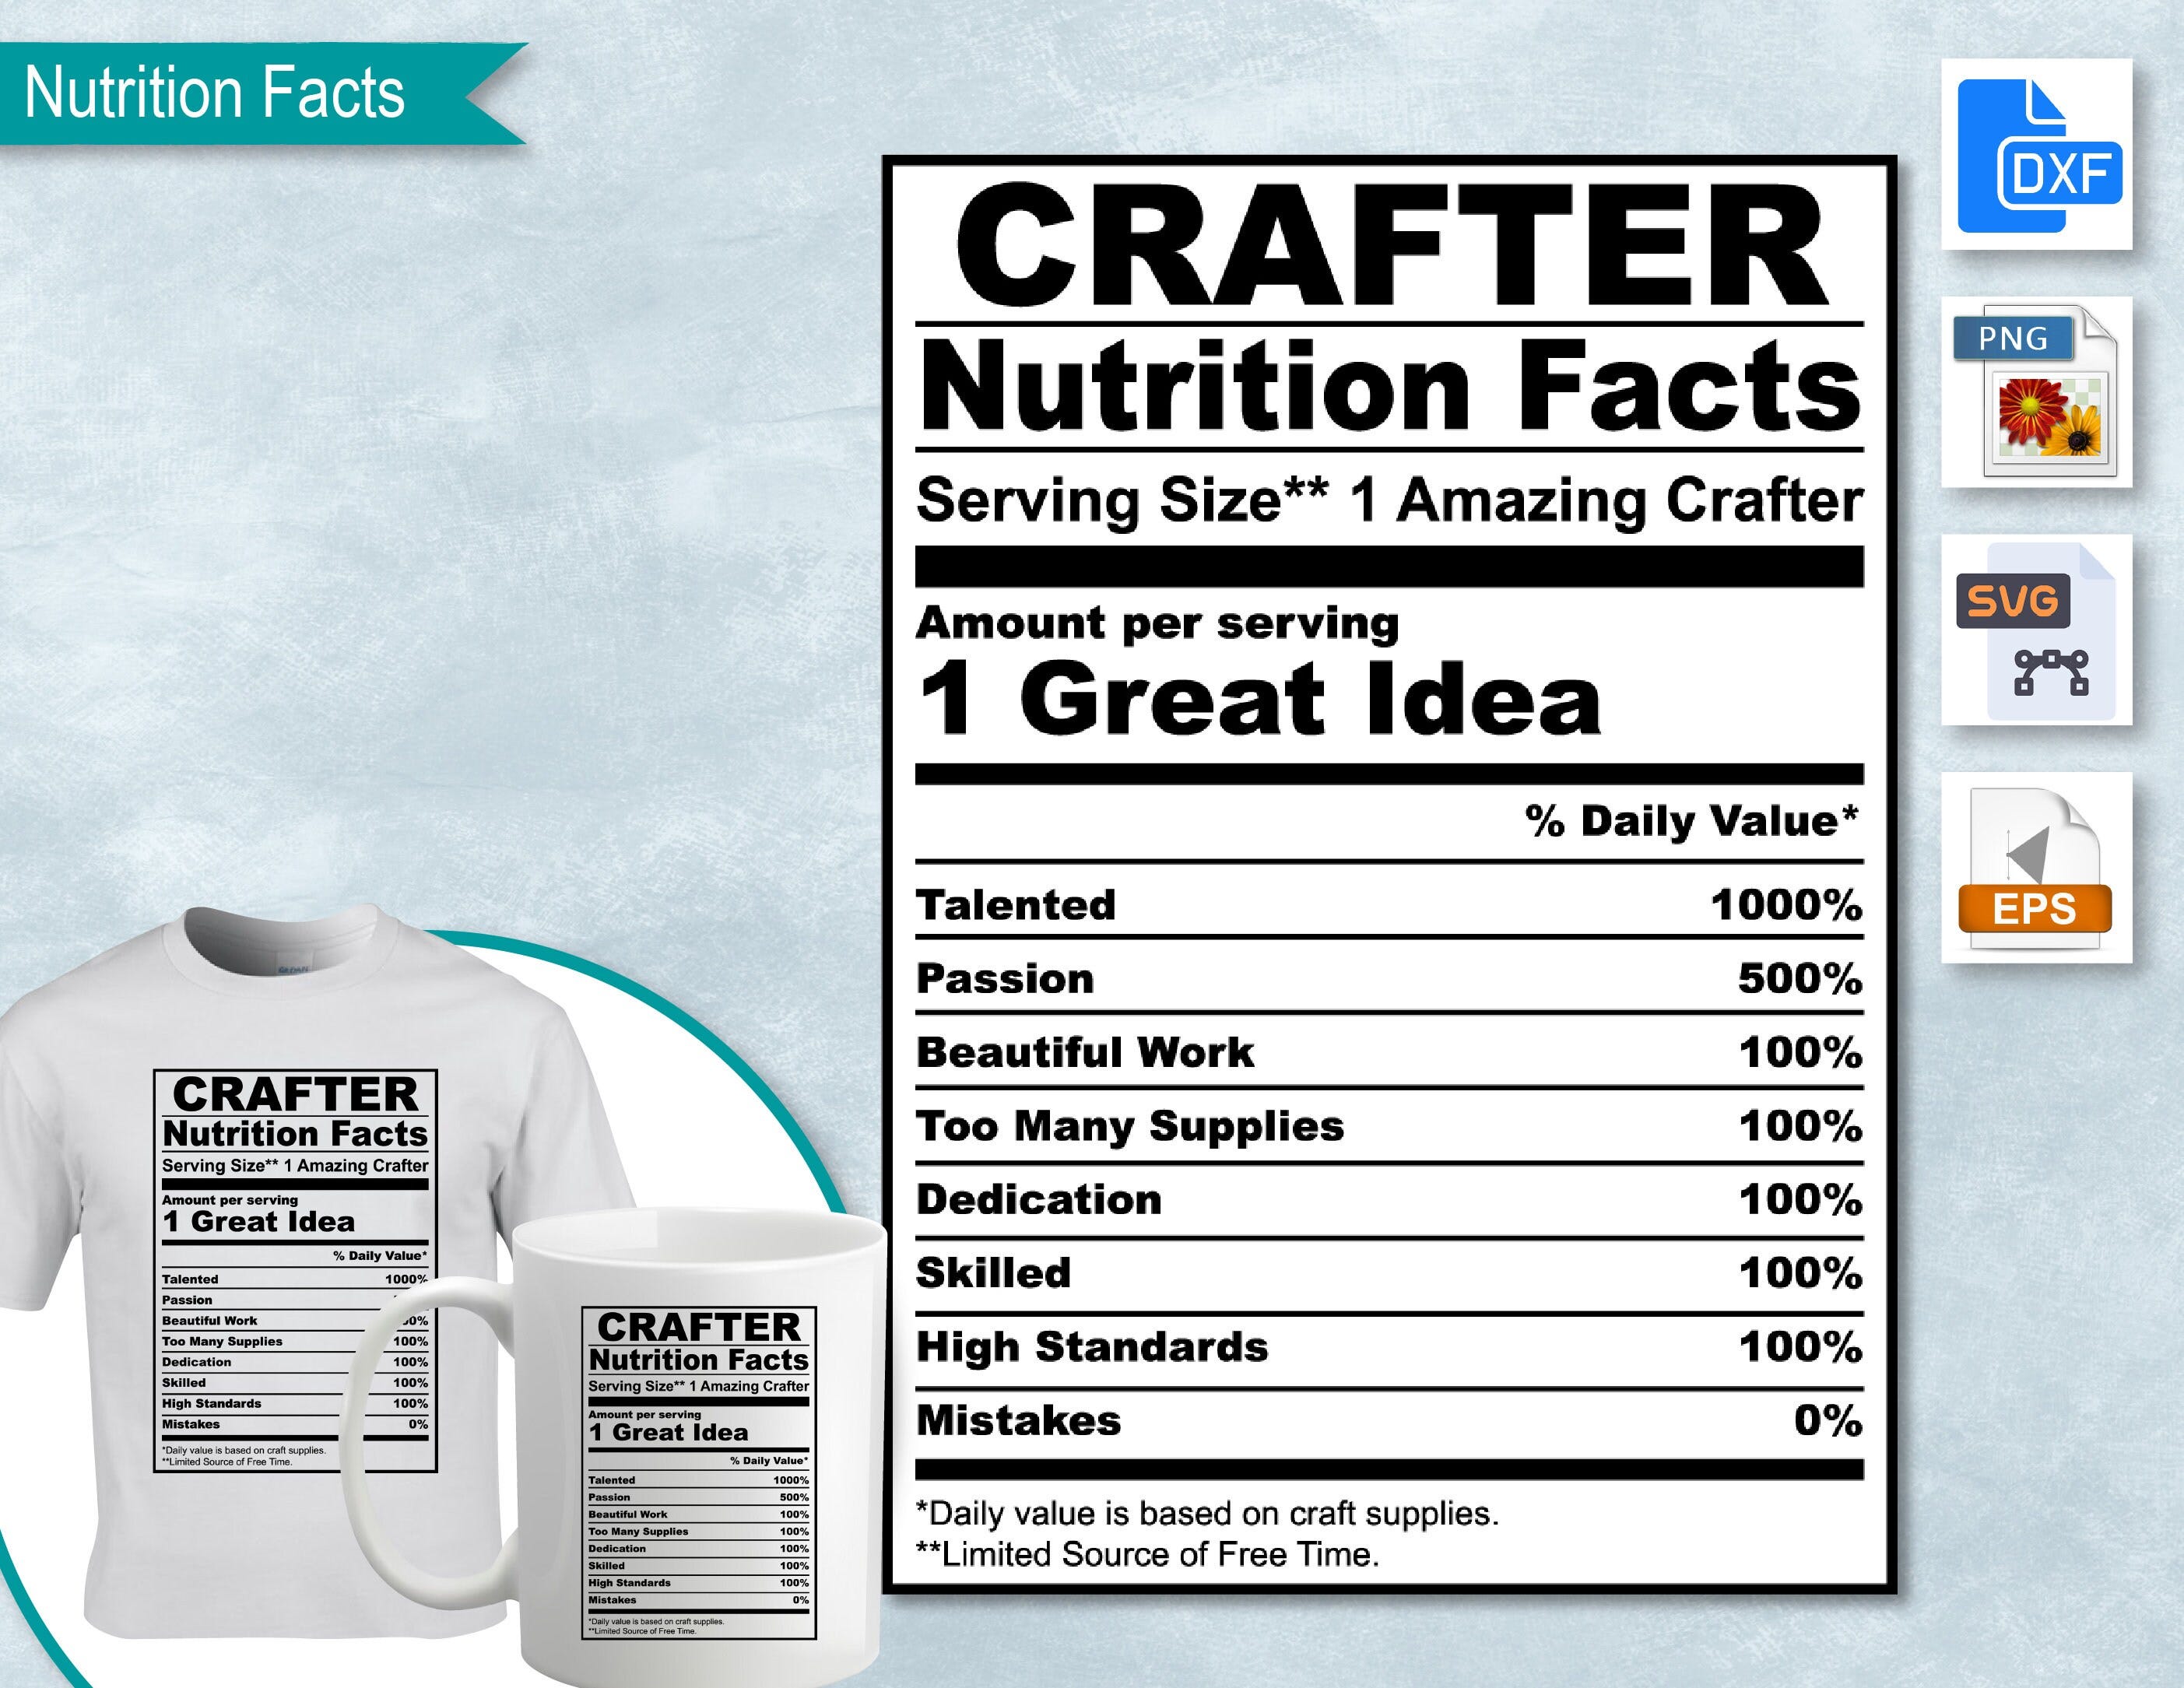 Crafter Nutrition Facts, SVG Nutritional Fact Label Template, Printable, DIY, Eps, PNG, SvG, DxF, Cricut, Silhouette